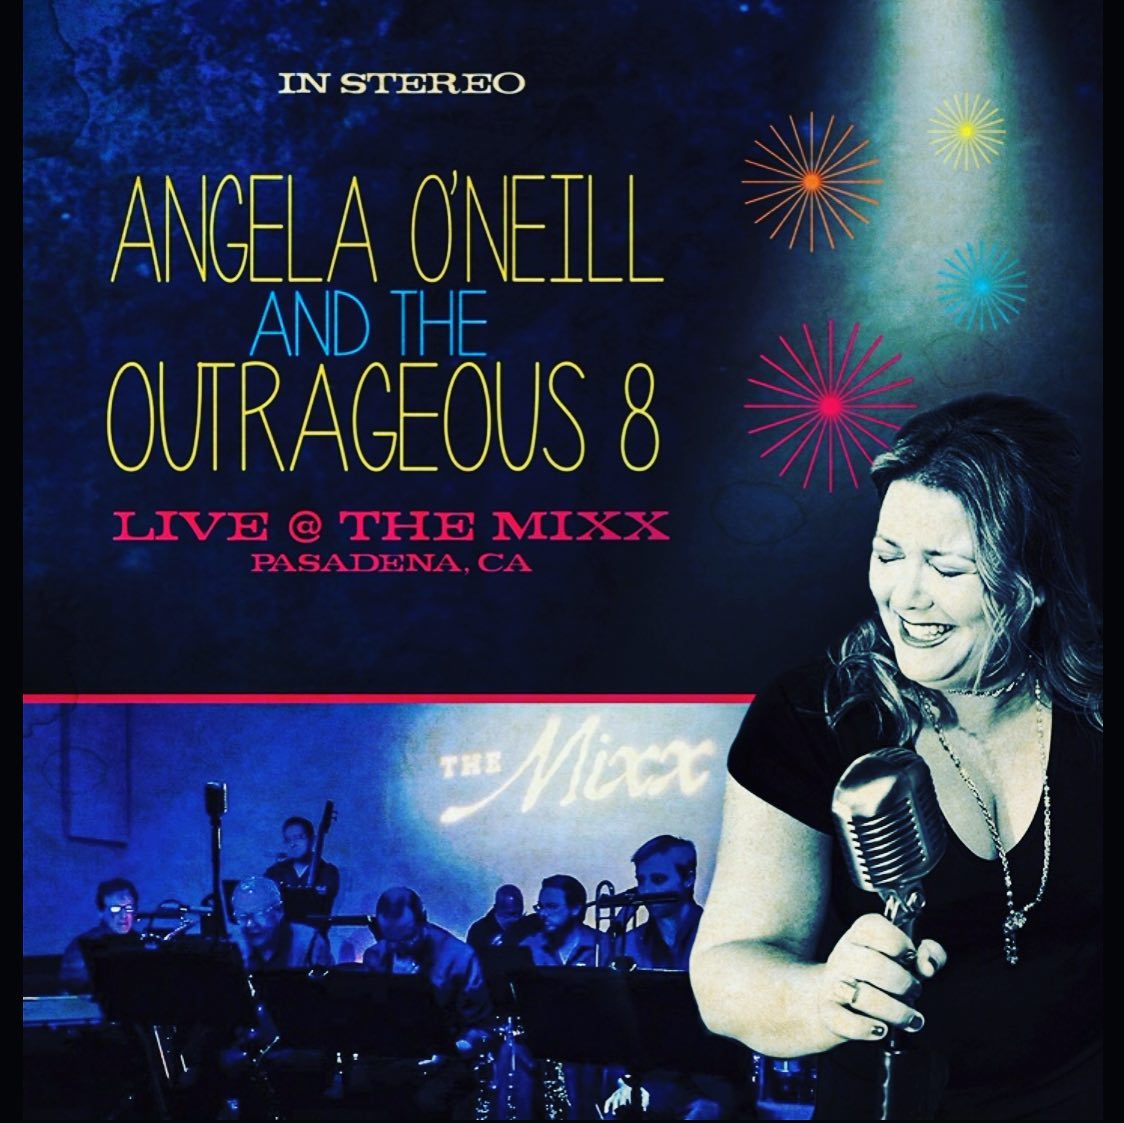 You are currently viewing Angela O’Neil and The Outrageous 8